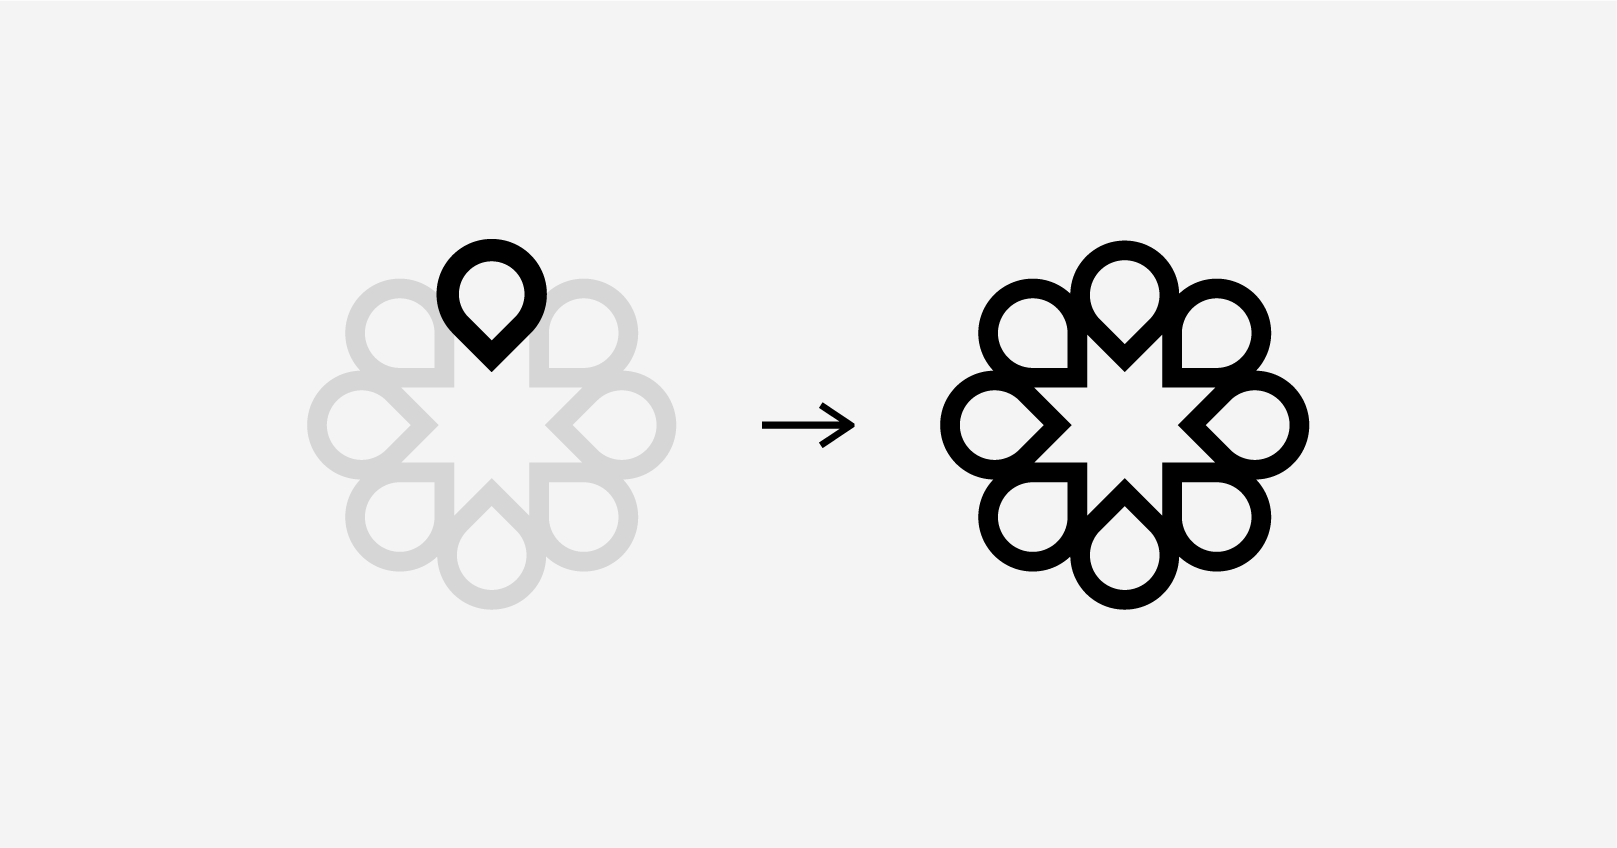 "Liquid Collective's brand symbol is a group of liquid droplets repeated in a circle. A graphical representation of 'one from many,' the resulting shape is harmonious and balanced with a star formed in the middle, symbolizing the formation of the Liquid Collective and our intended impact. The sum is greater than its parts."